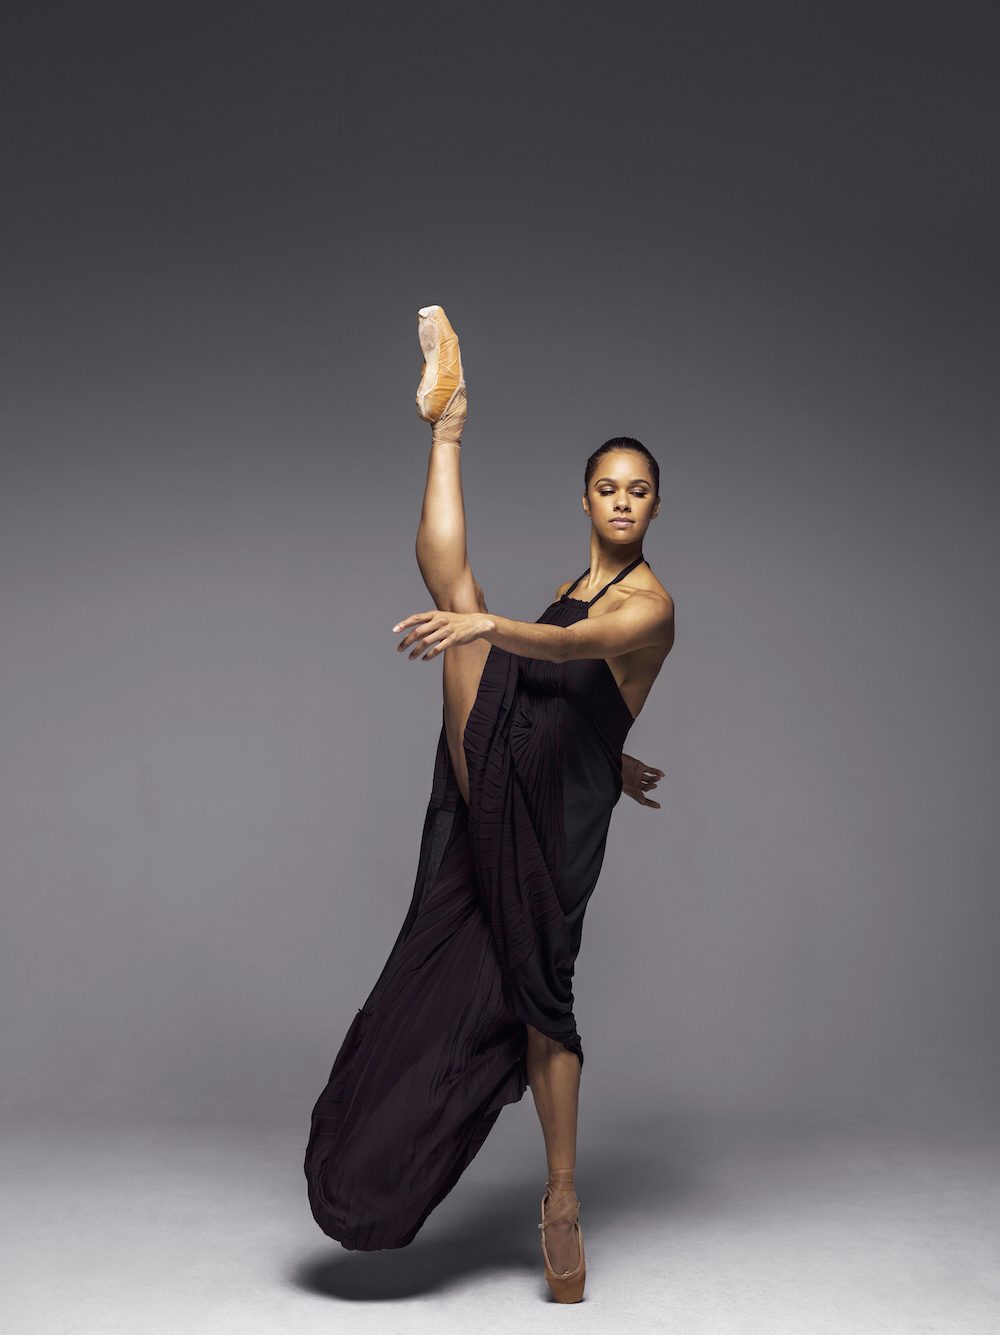 Misty Copeland, the first African-American female principal dancer with the American Ballet Theater